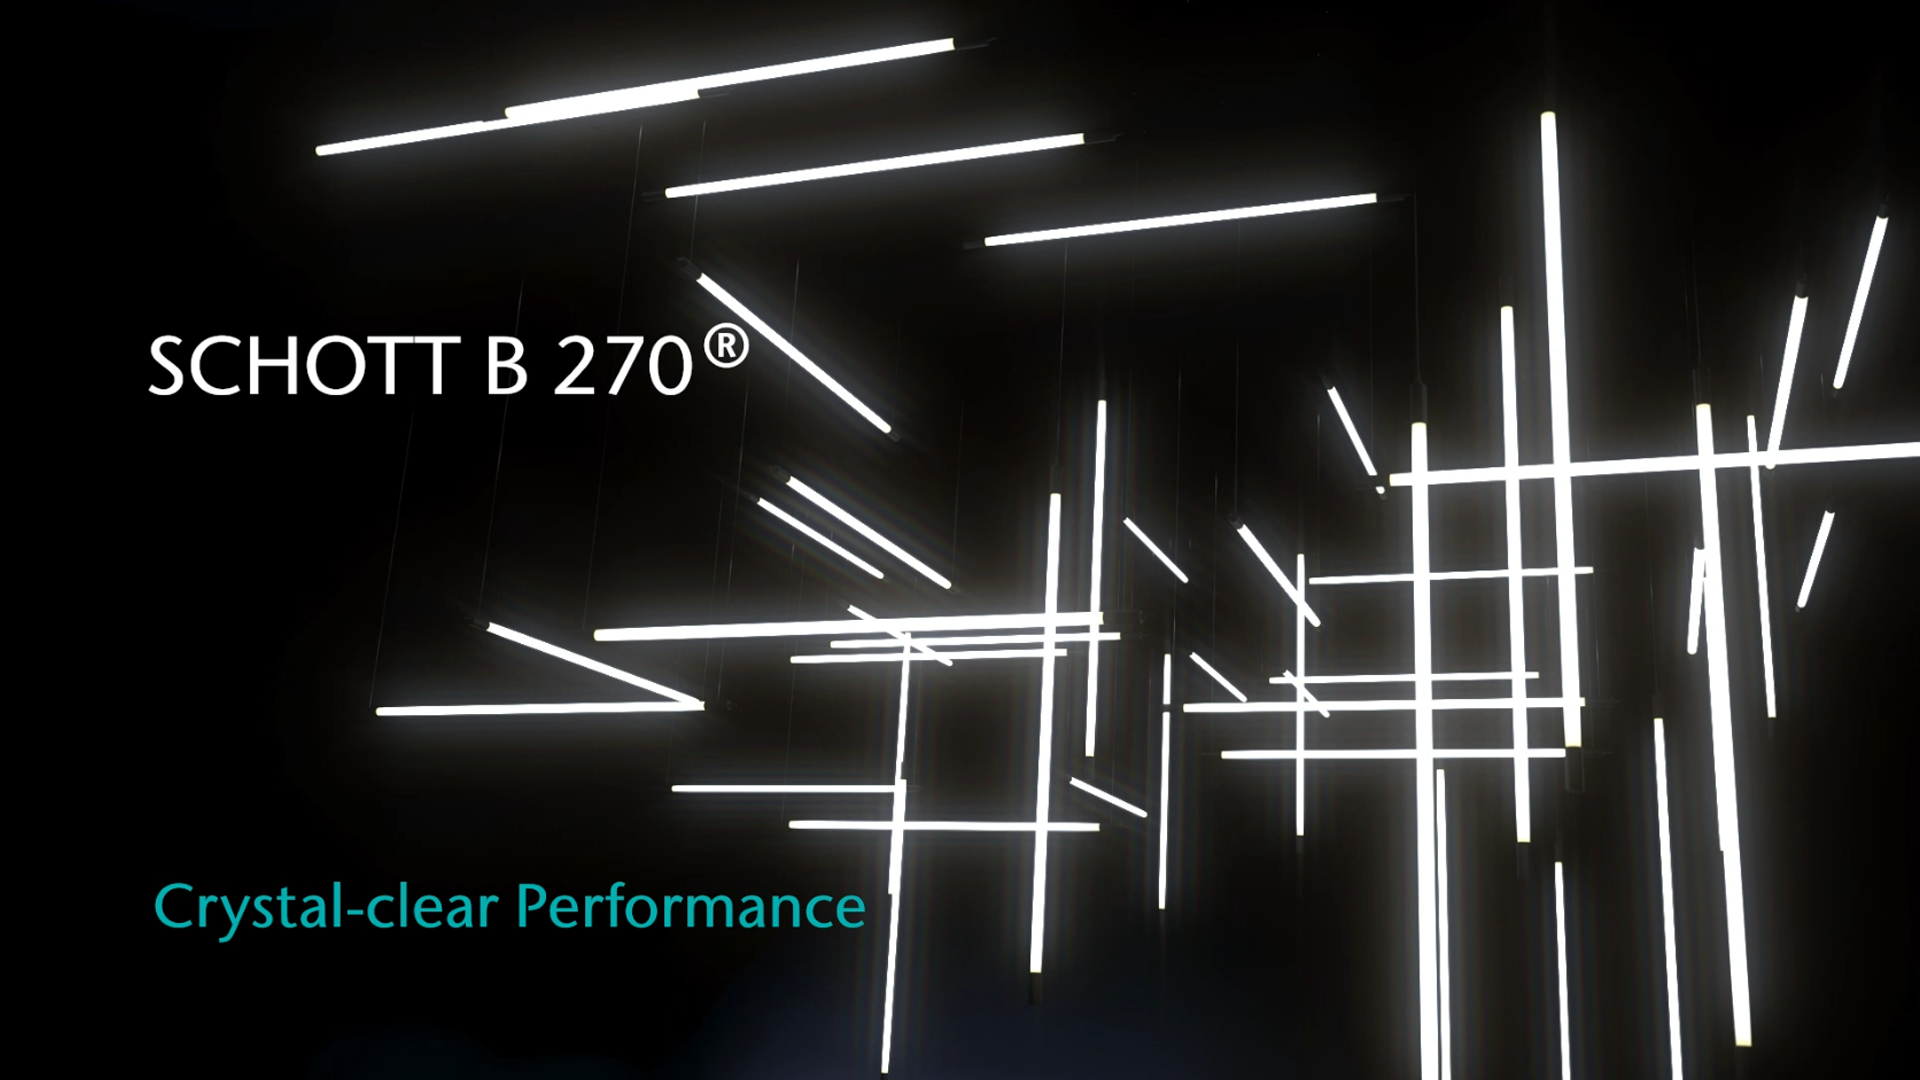 A lot of white fluorescent tubes floating on different levels at right angles to each other in a dark room. In front of it is a hovering text: “SCHOTT B 270® - Crystal clear Performance.